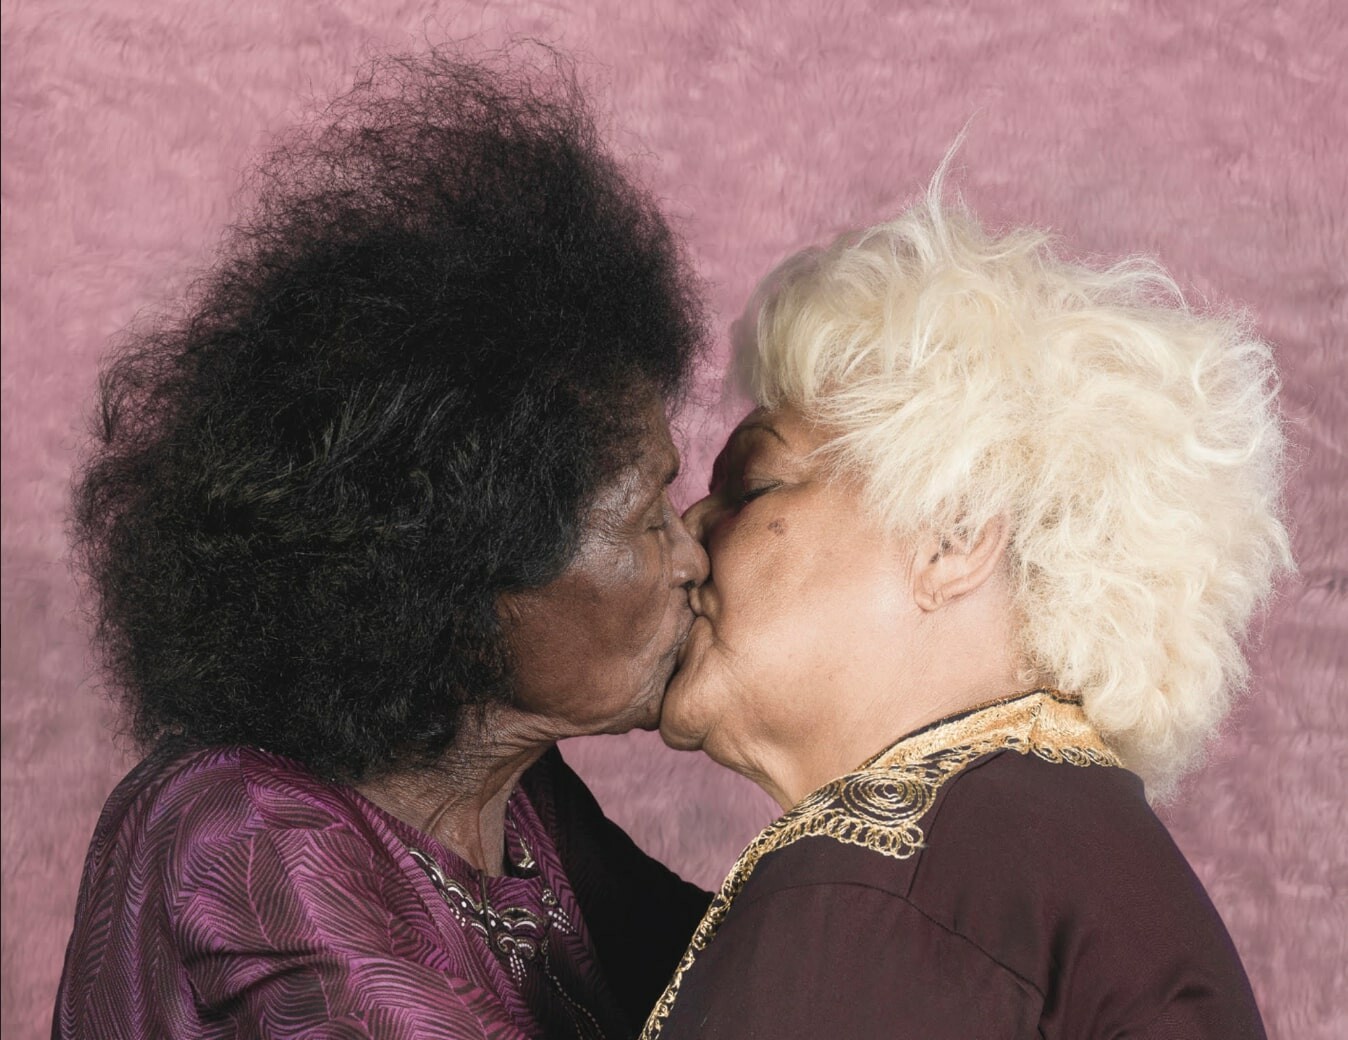 Photo by Enrique Rottenberg of two elderly ladies kissing on the lips.